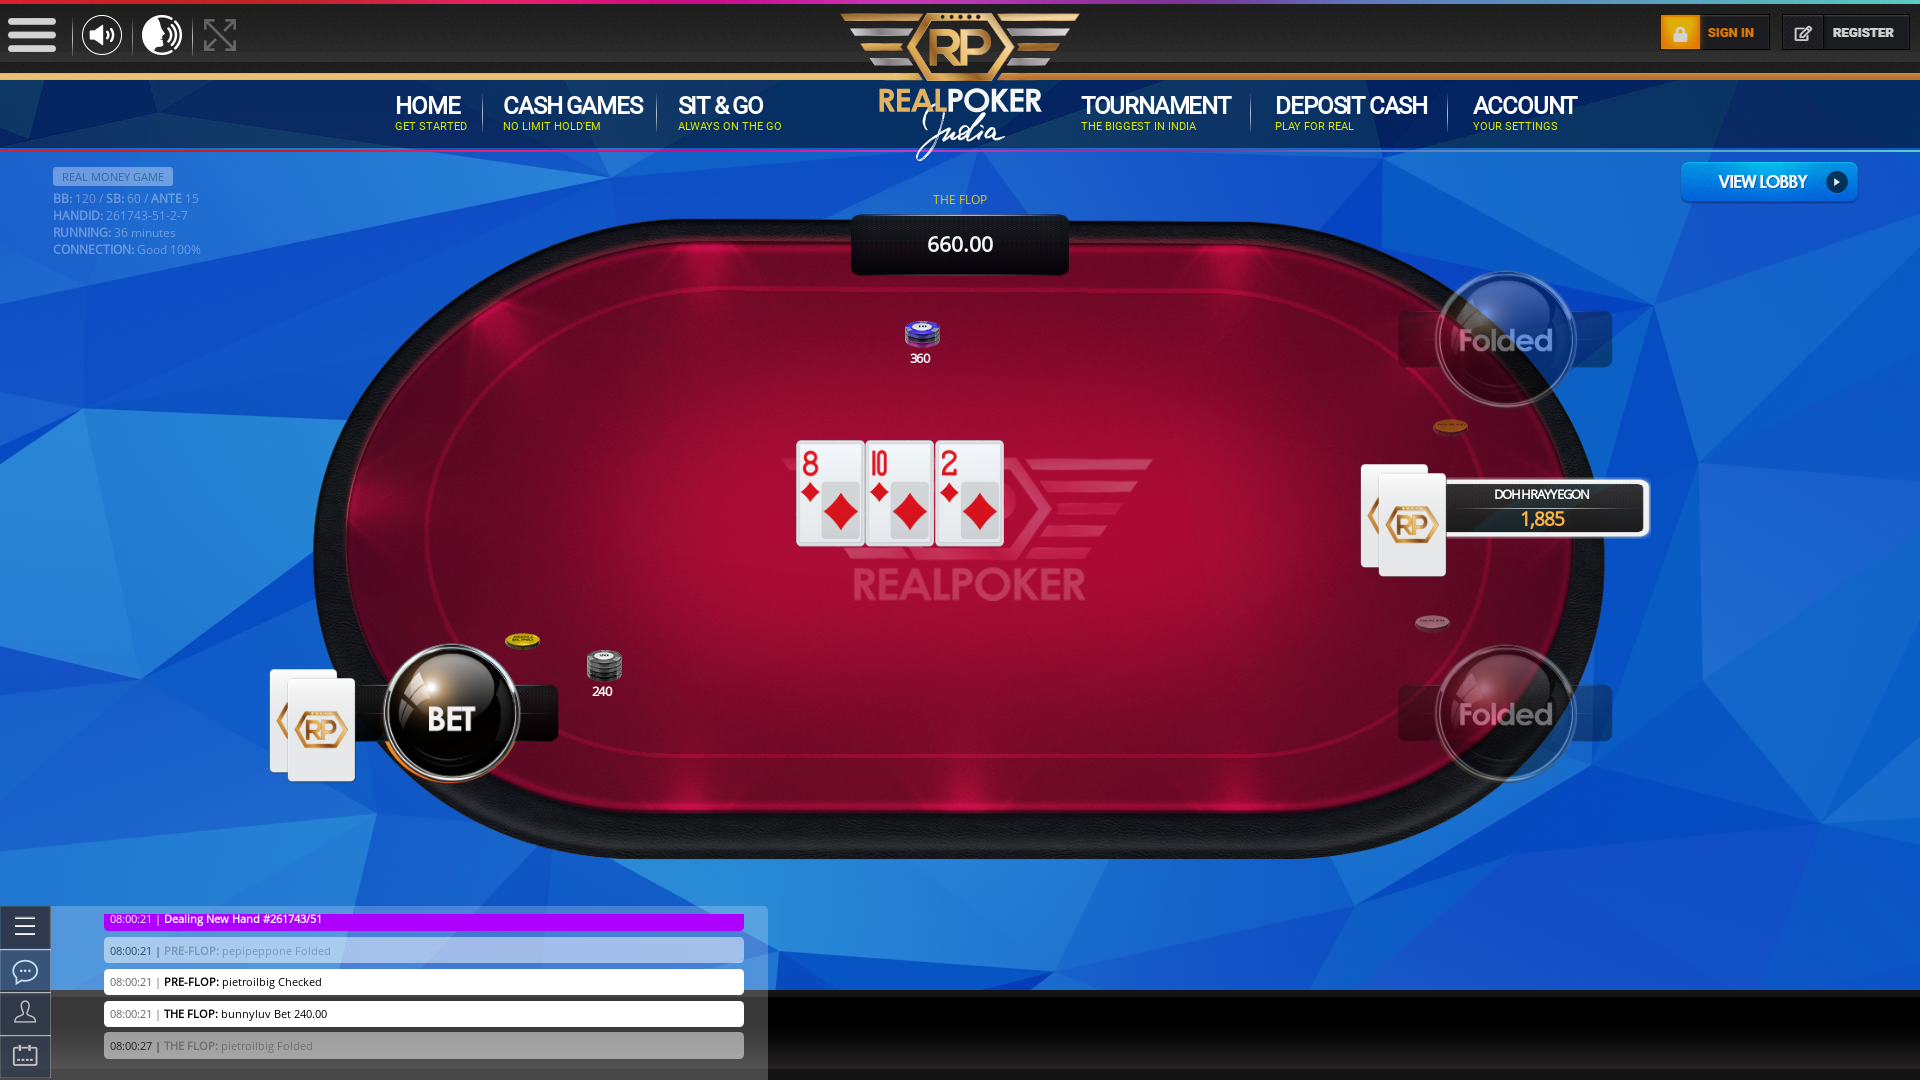 Mandovi River real poker on a 10 player table in the 36th minute of the game